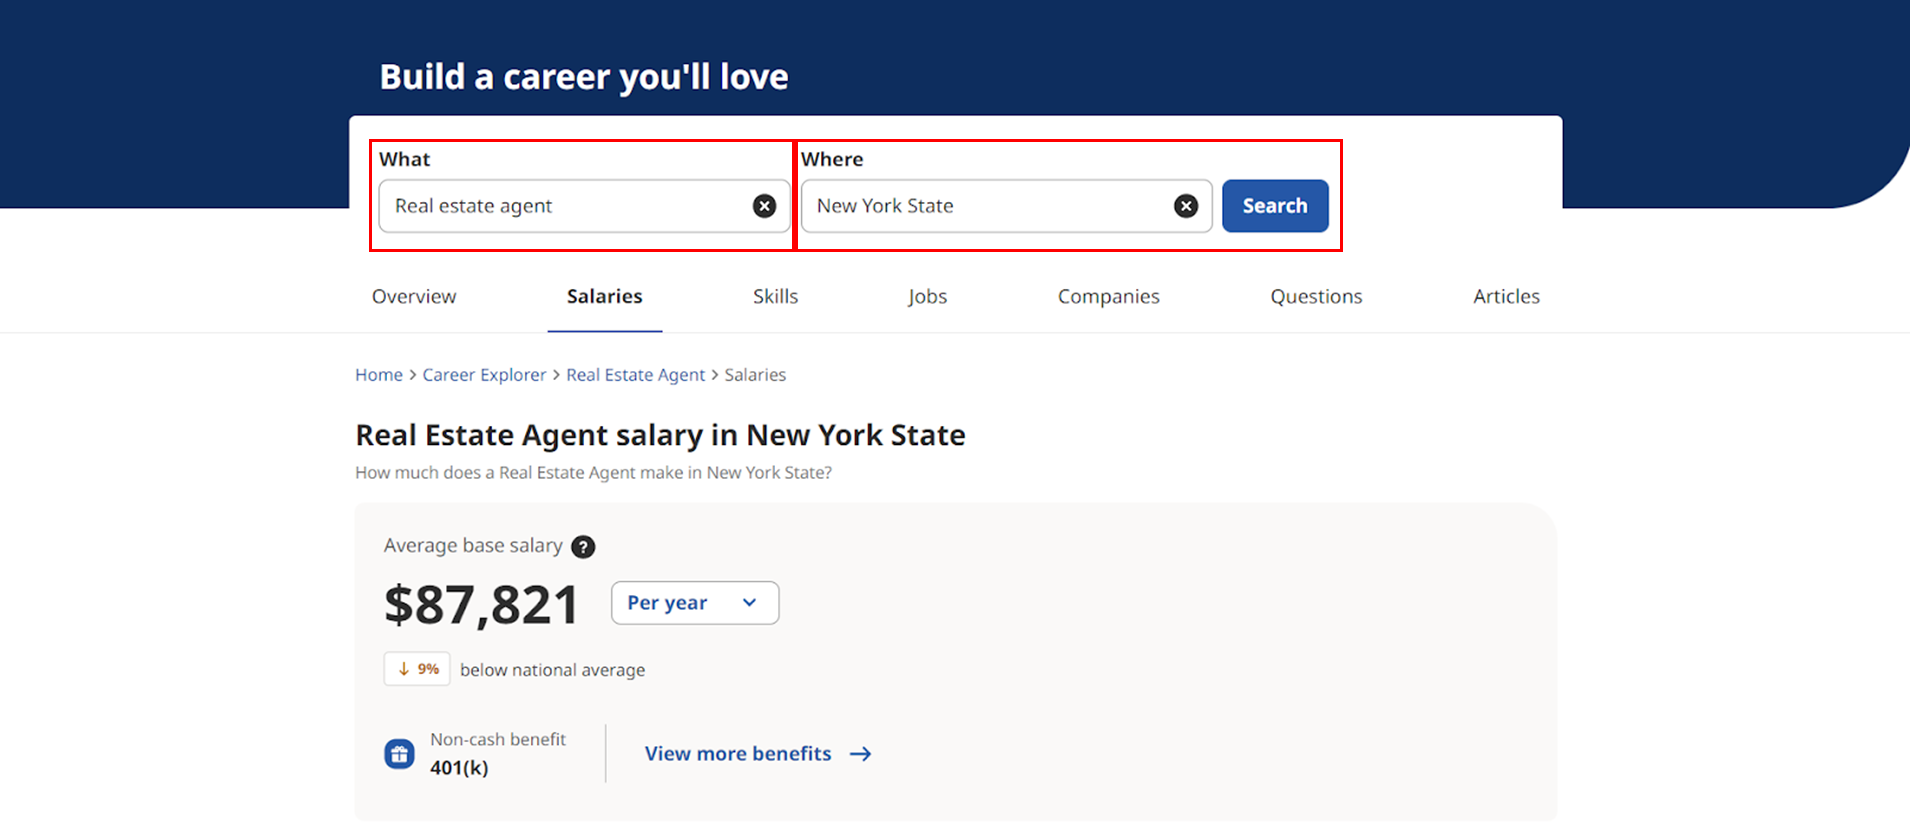 Real Estate Agent salary in New York State.